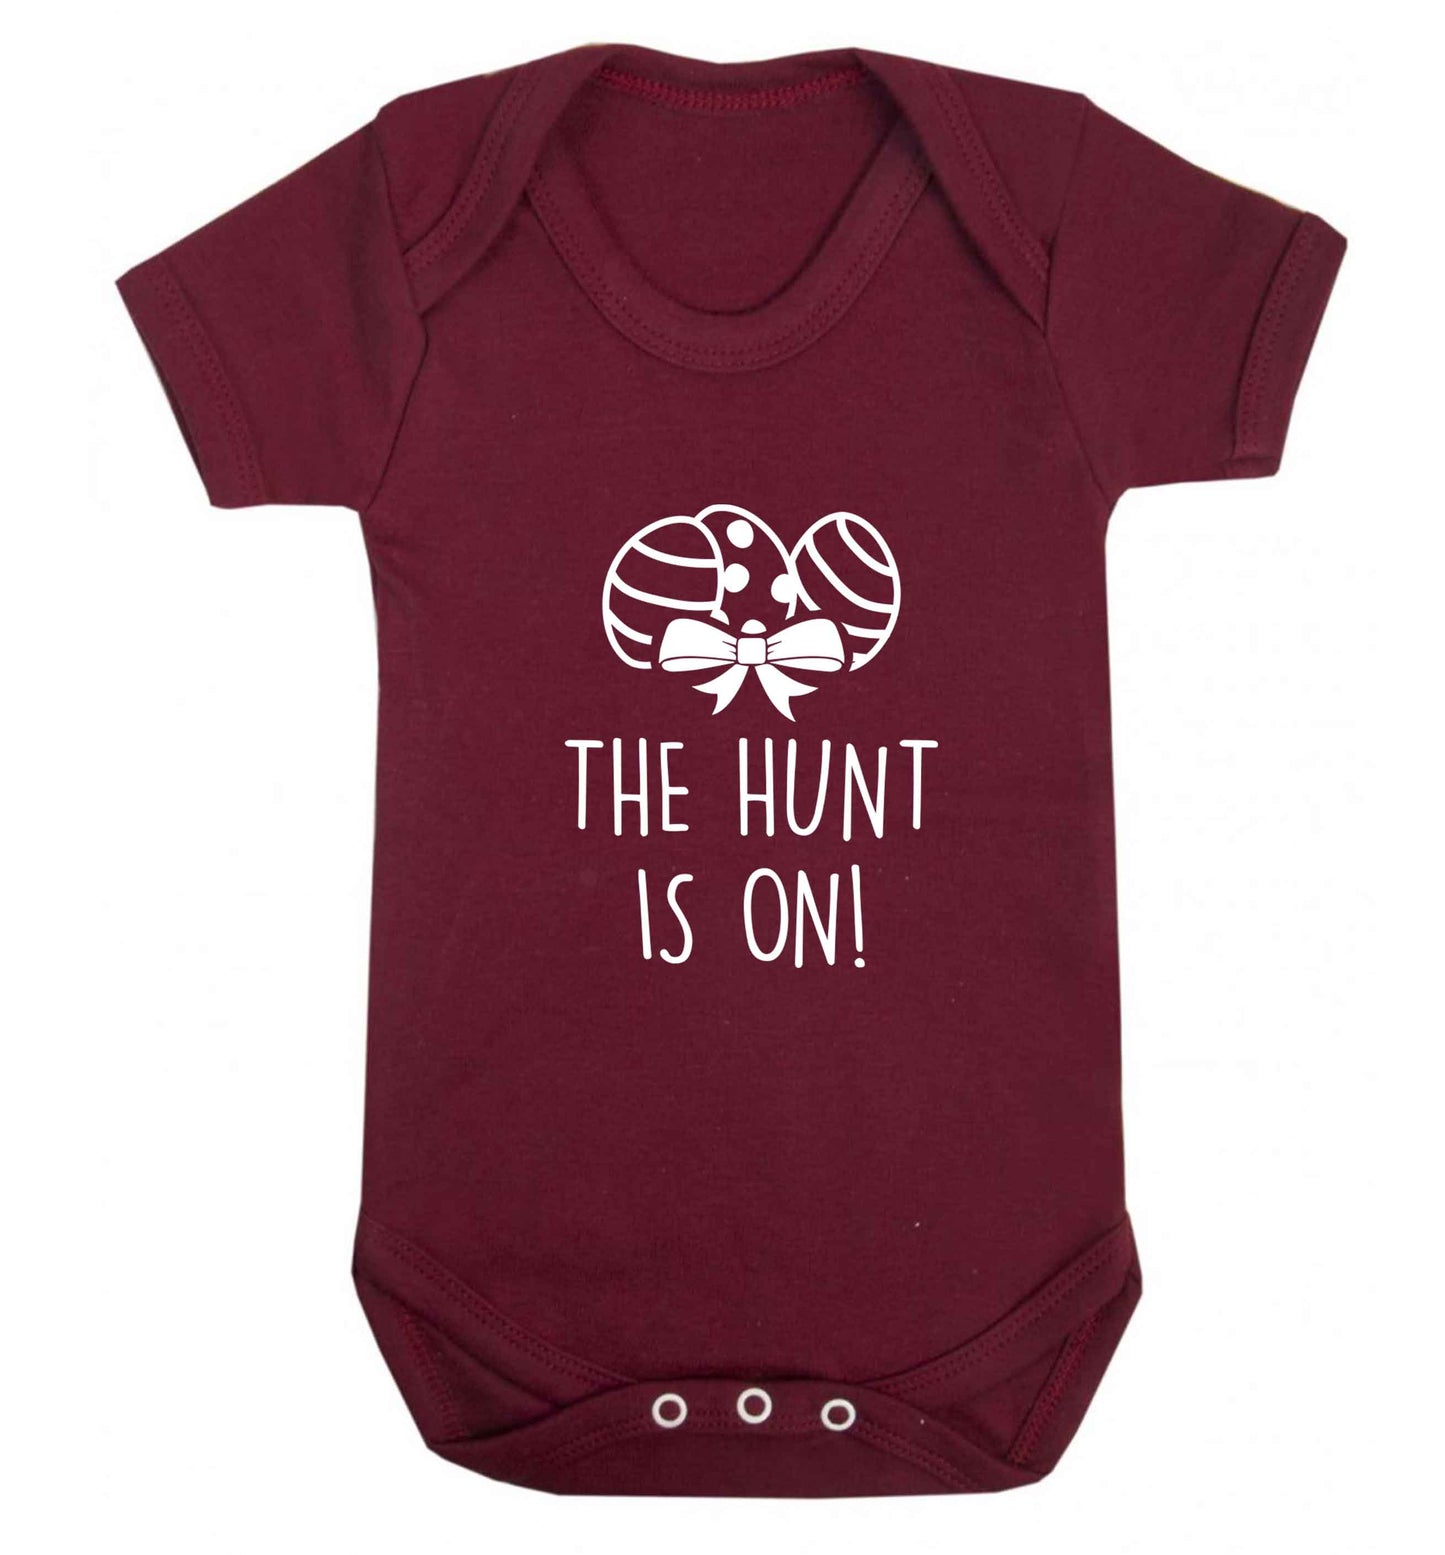 The hunt is on baby vest maroon 18-24 months